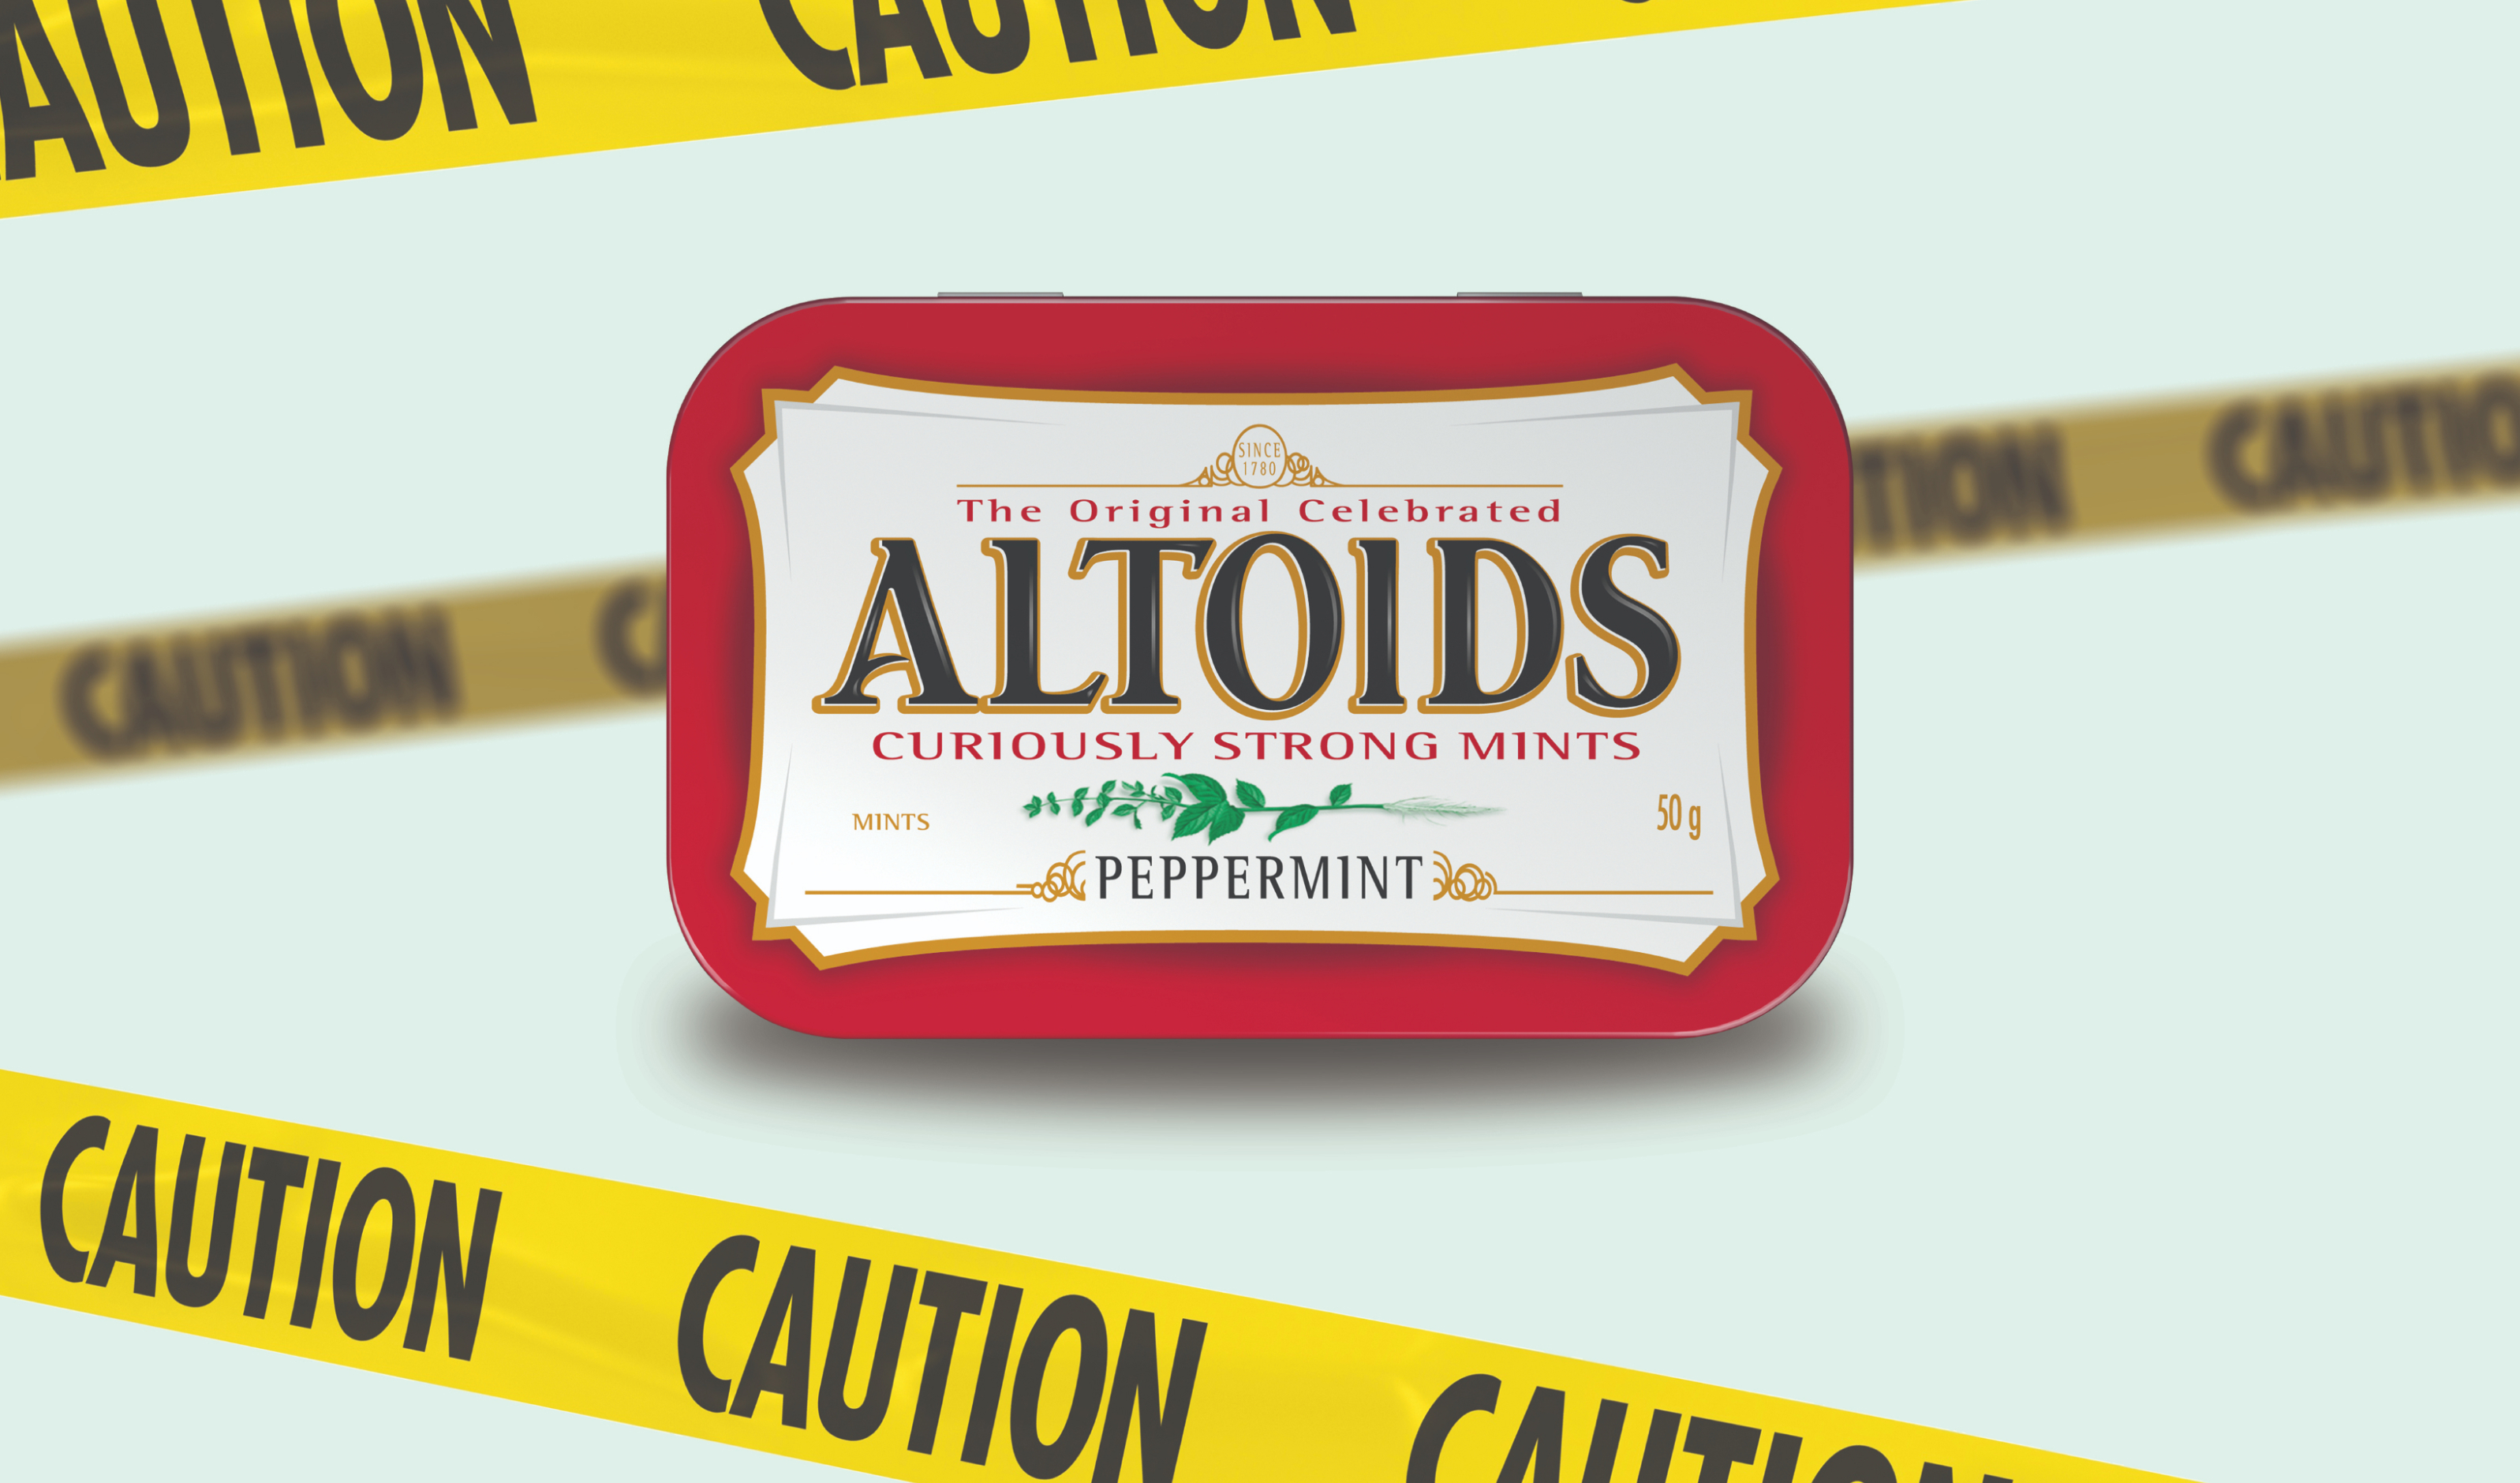 Tin of Peppermint Altoids with yellow caution tape around it on a mint green background